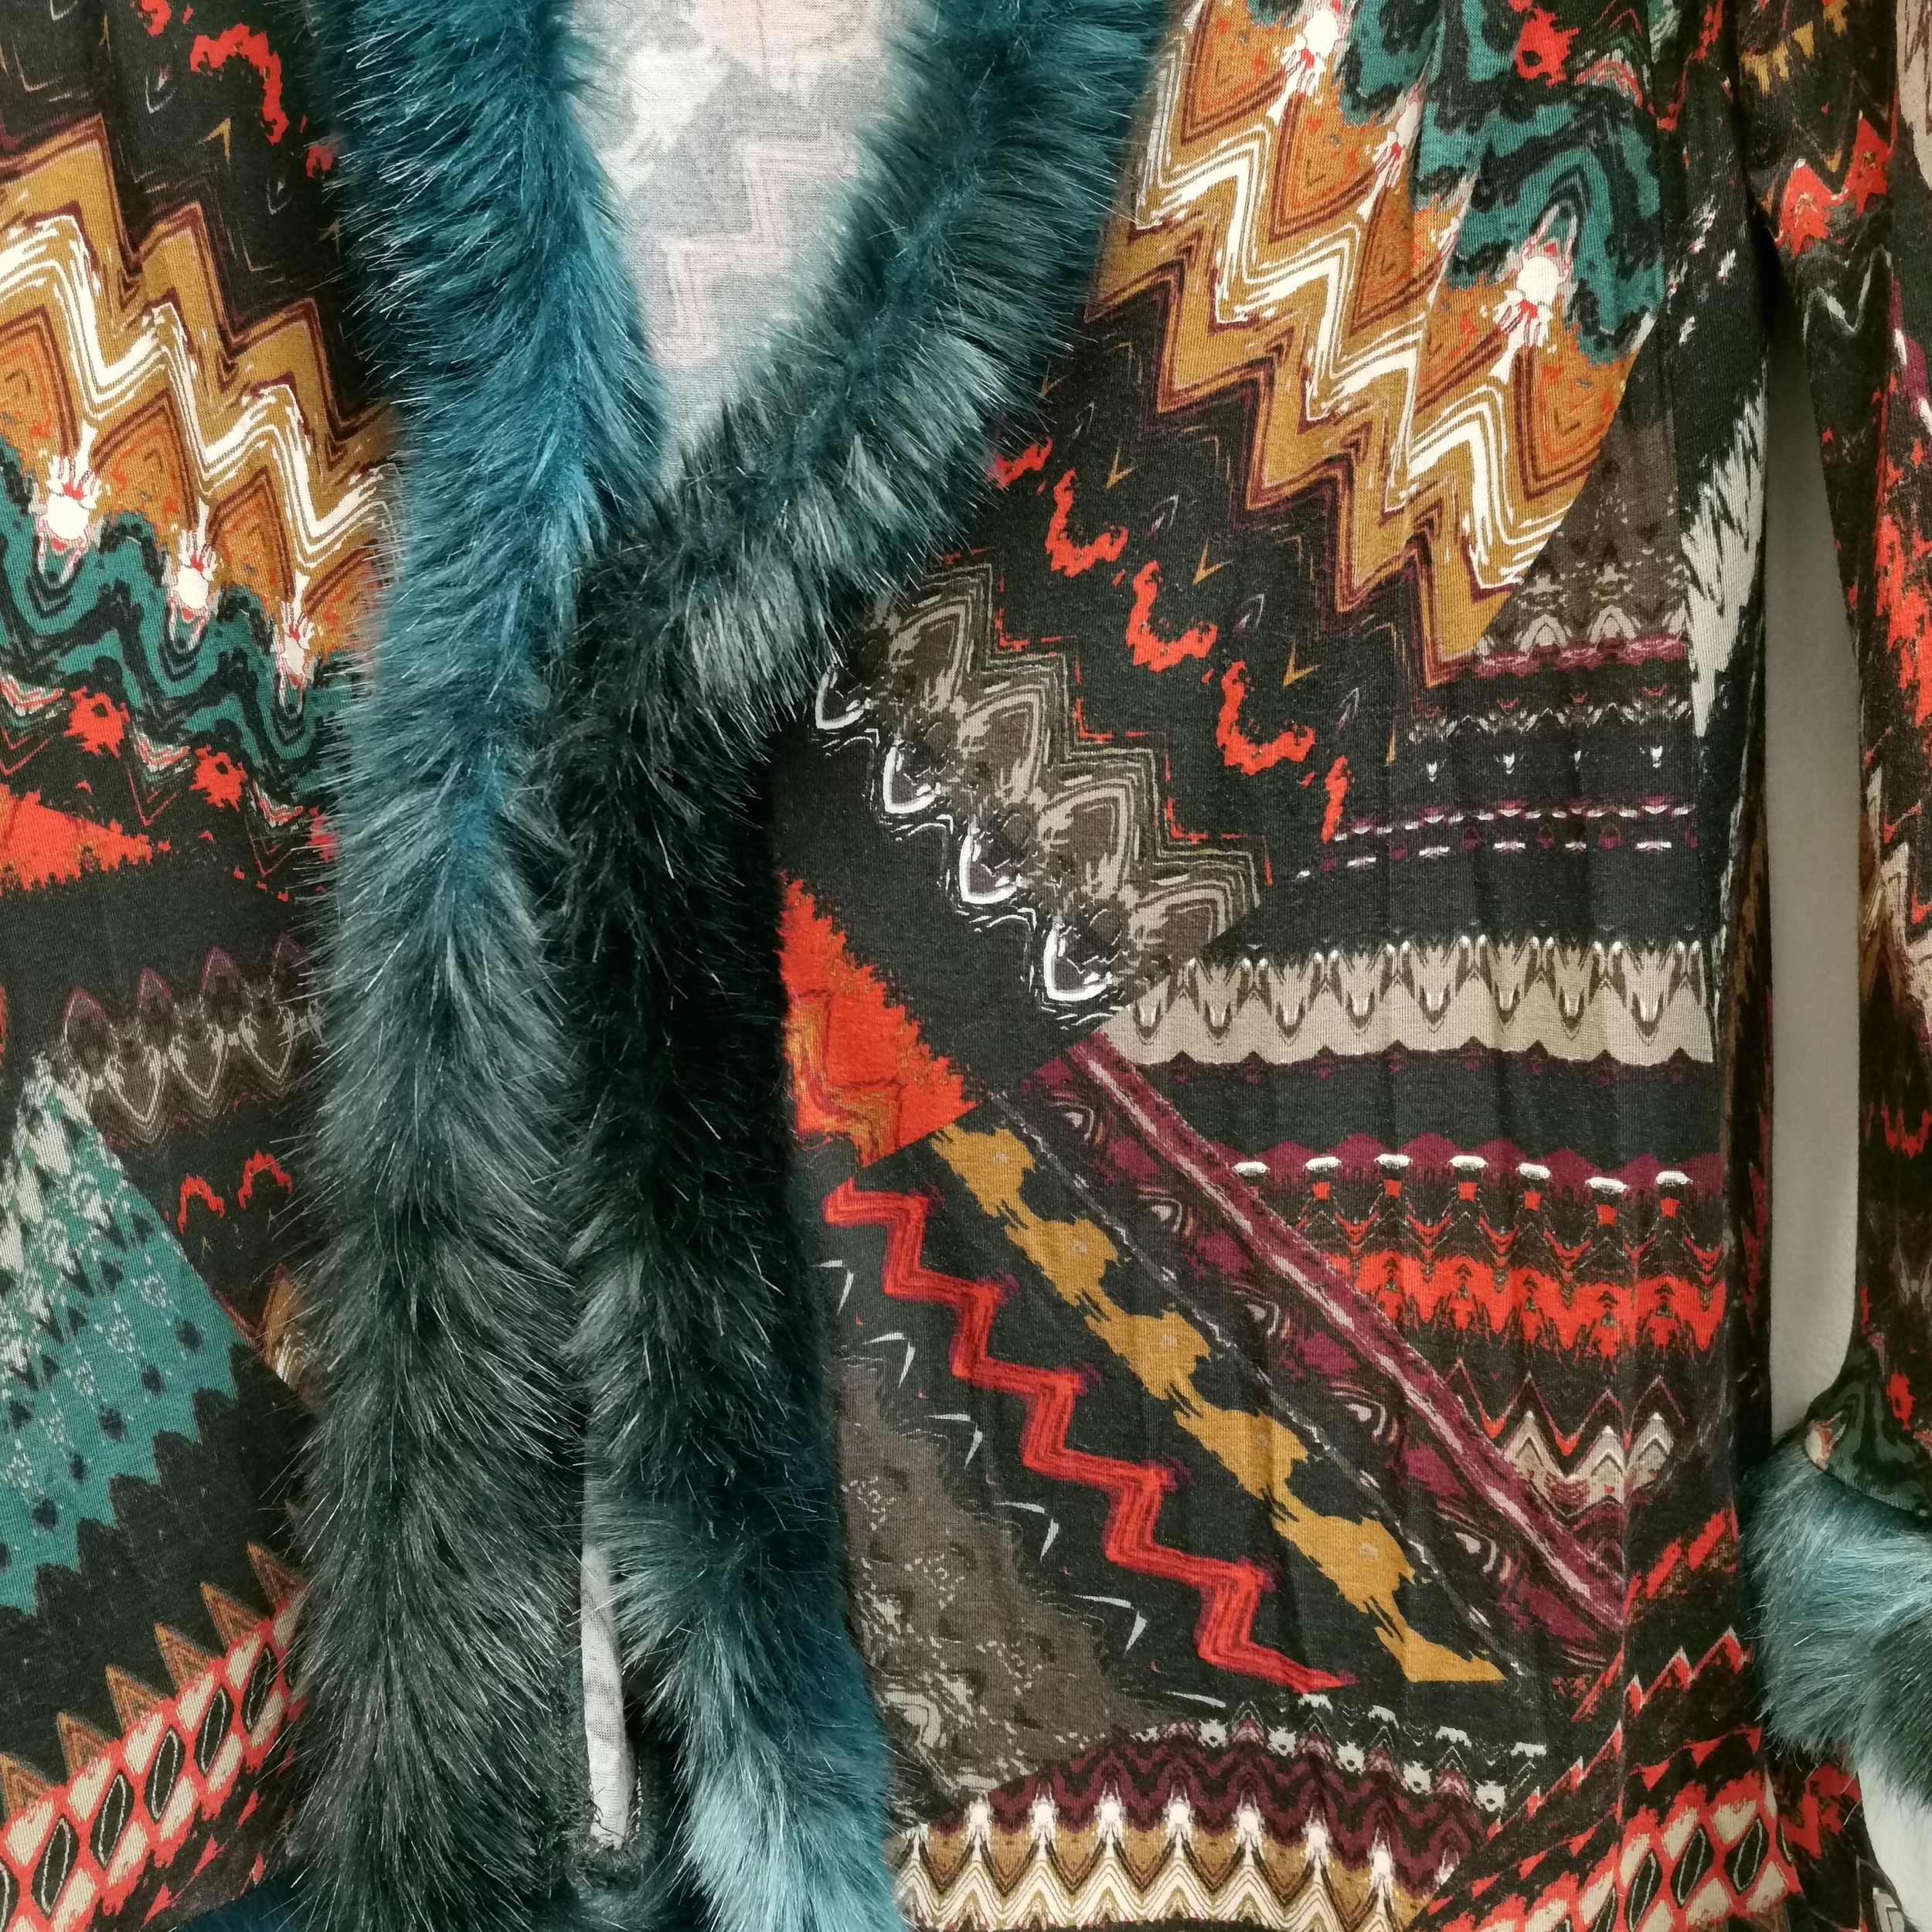 Vintage patterned unlined jacket with teal faux fur trim by James Lakeland t/w navy wool and denim - Image 4 of 5